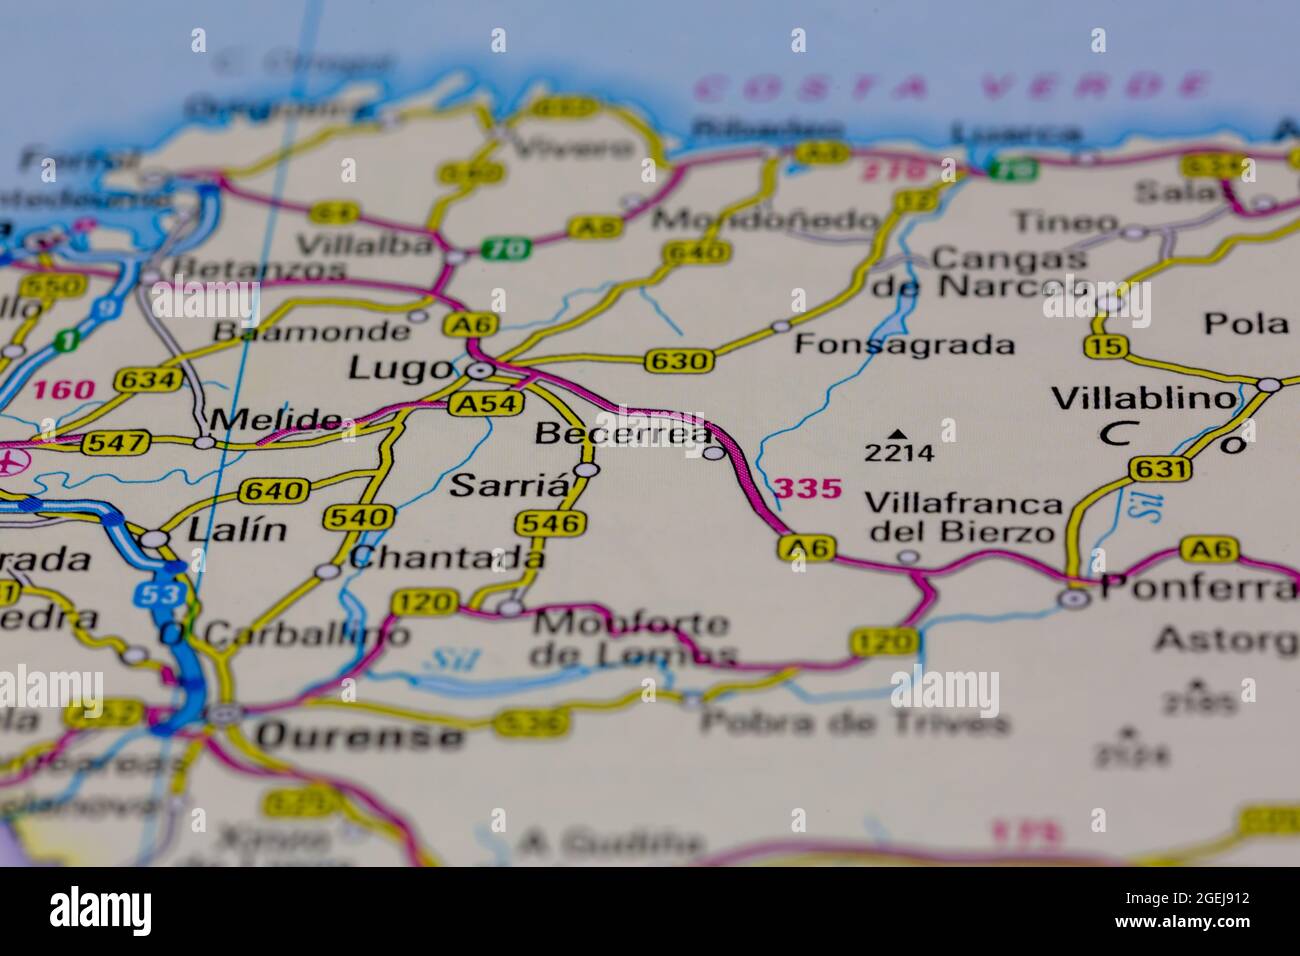 Becerrea Spain shown on a road map or Geography map Stock Photo